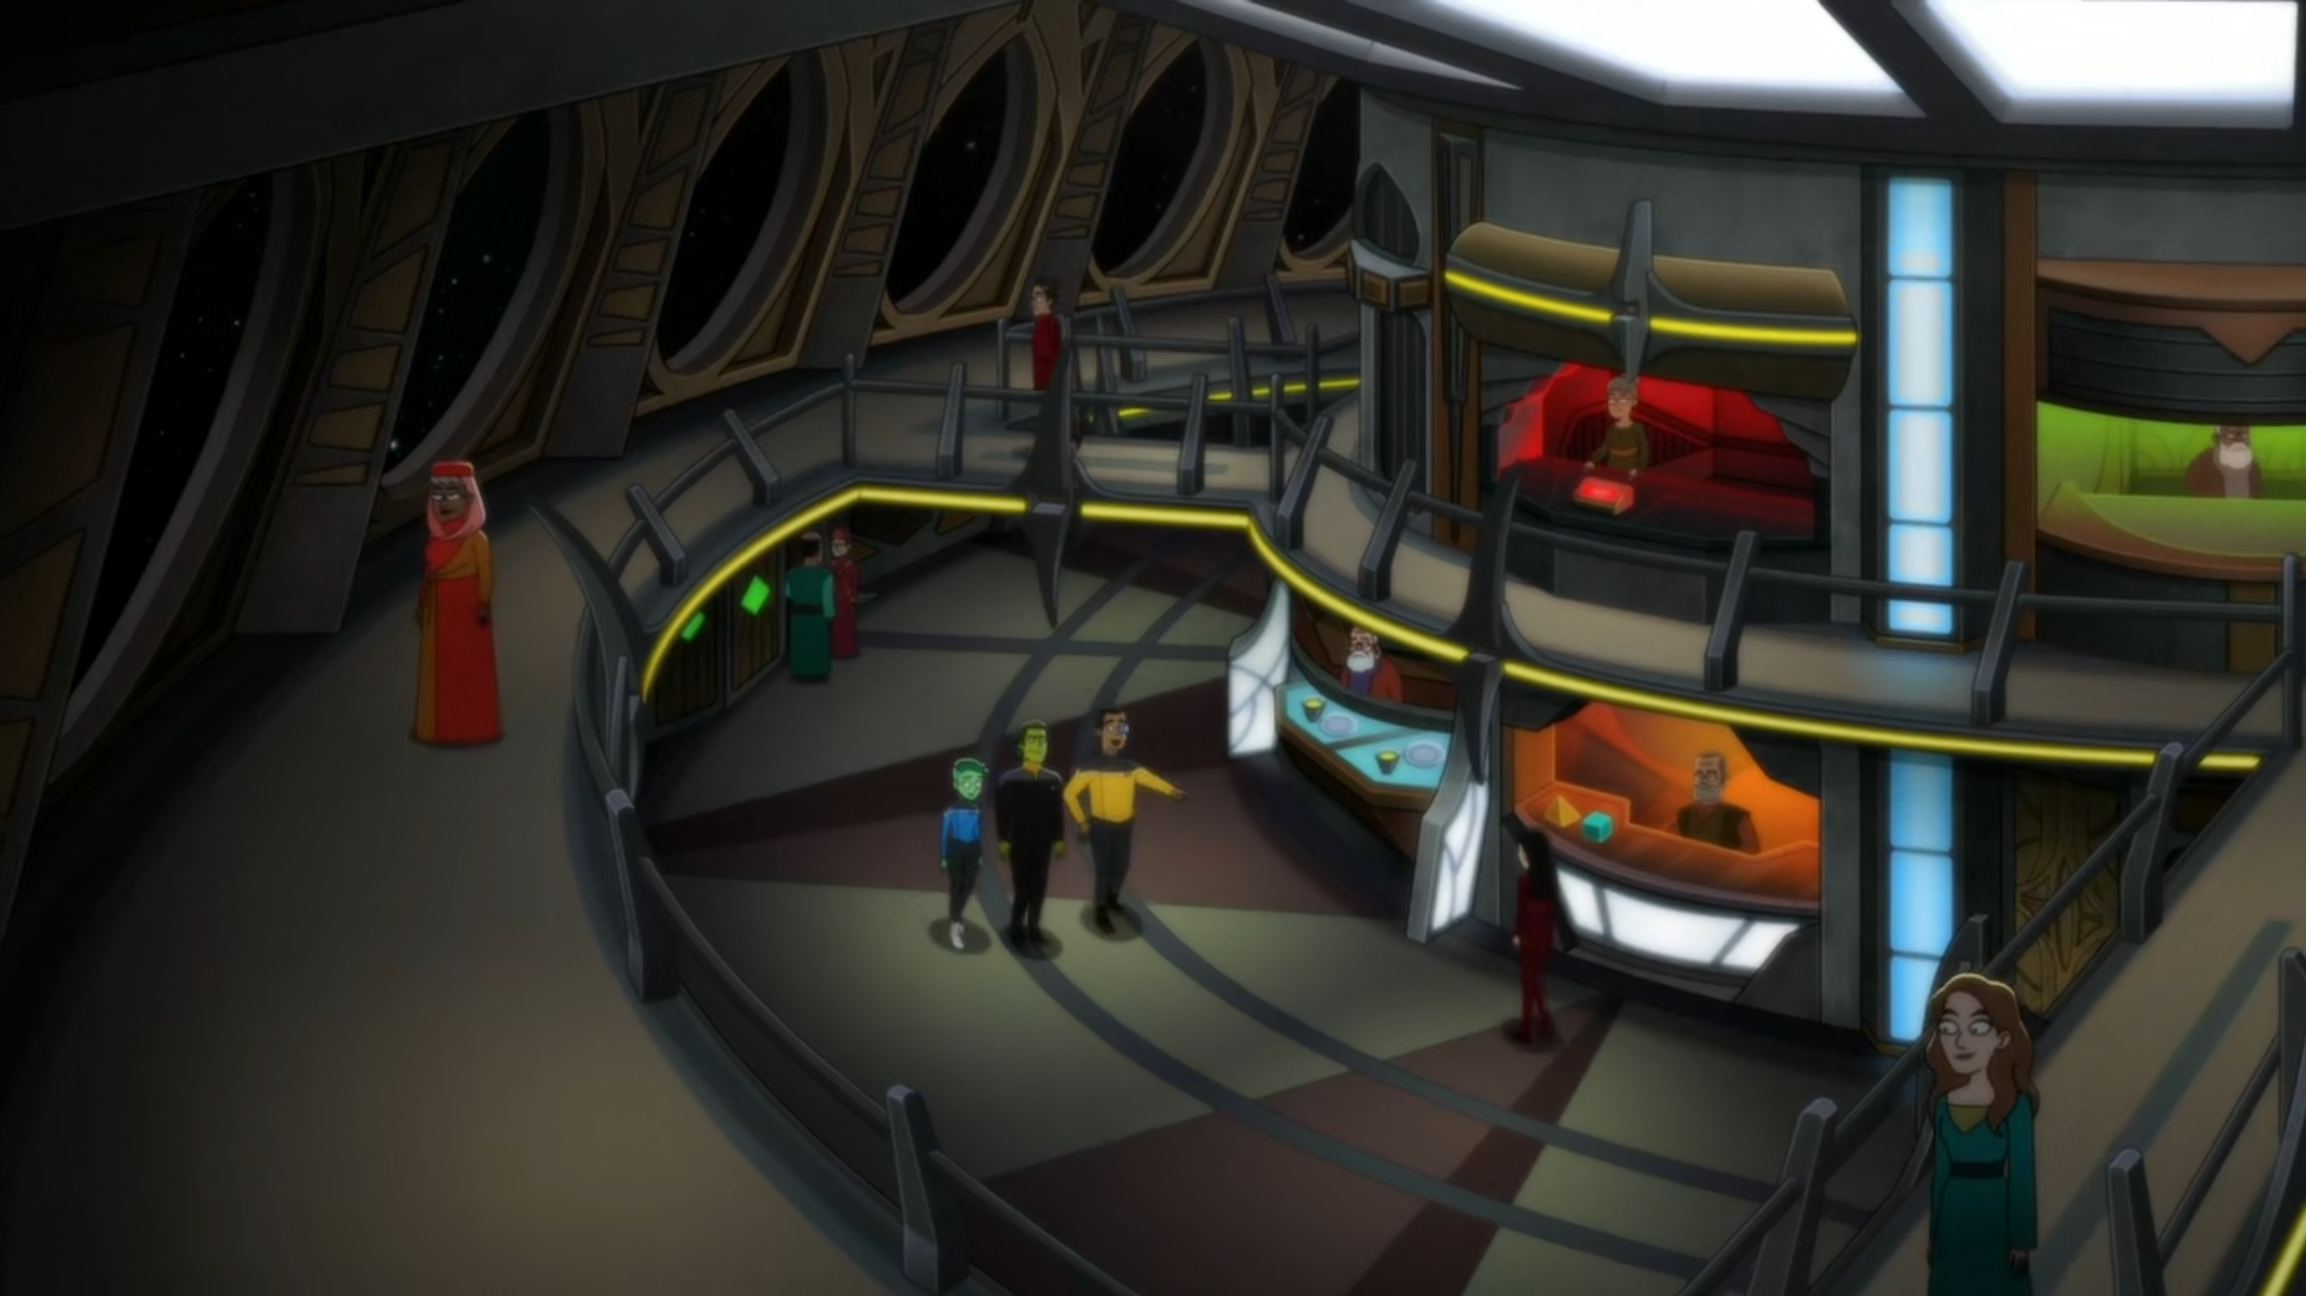 Wide view of the Deep Space Nine promenade with Tendi, Mesk, and Rutherford on the lower level